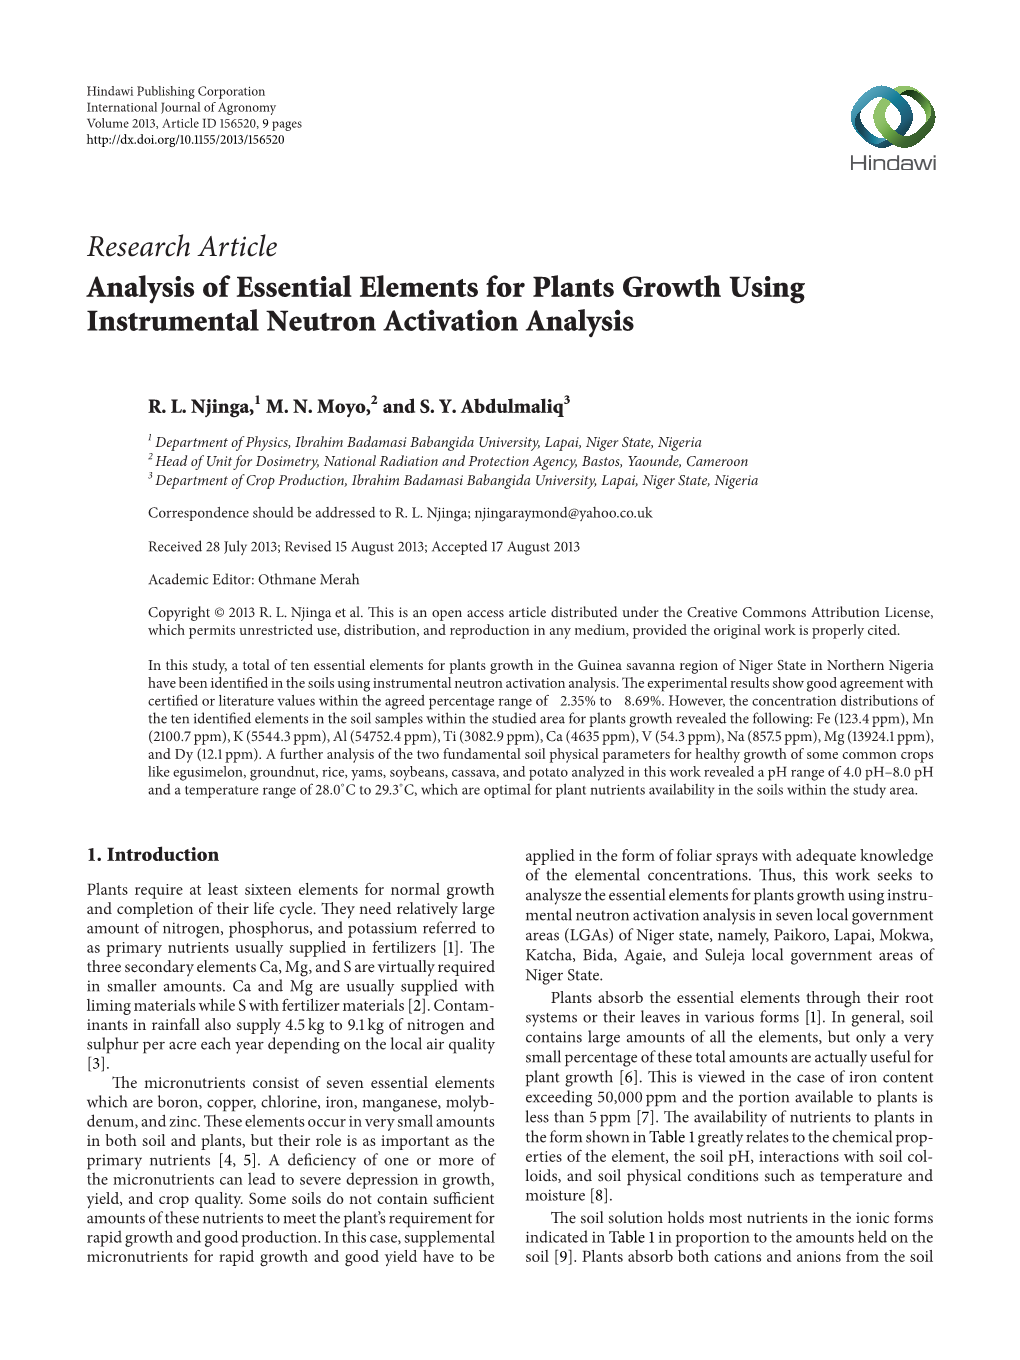 Analysis of Essential Elements for Plants Growth Using Instrumental Neutron Activation Analysis